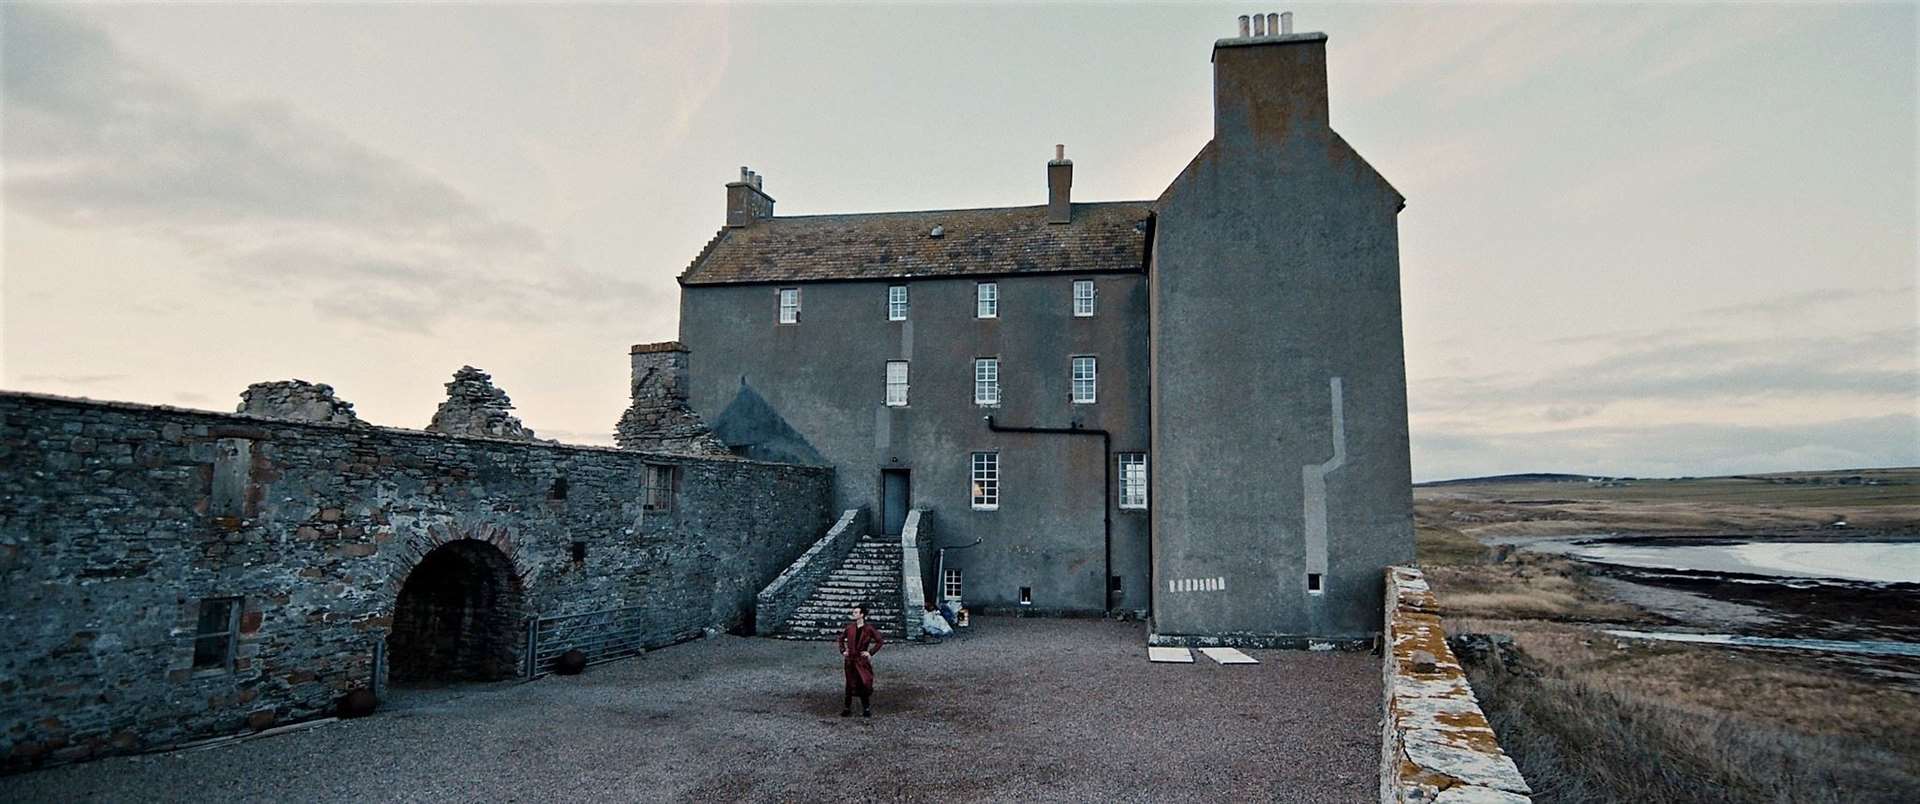 Freswick Castle features prominently in the film.